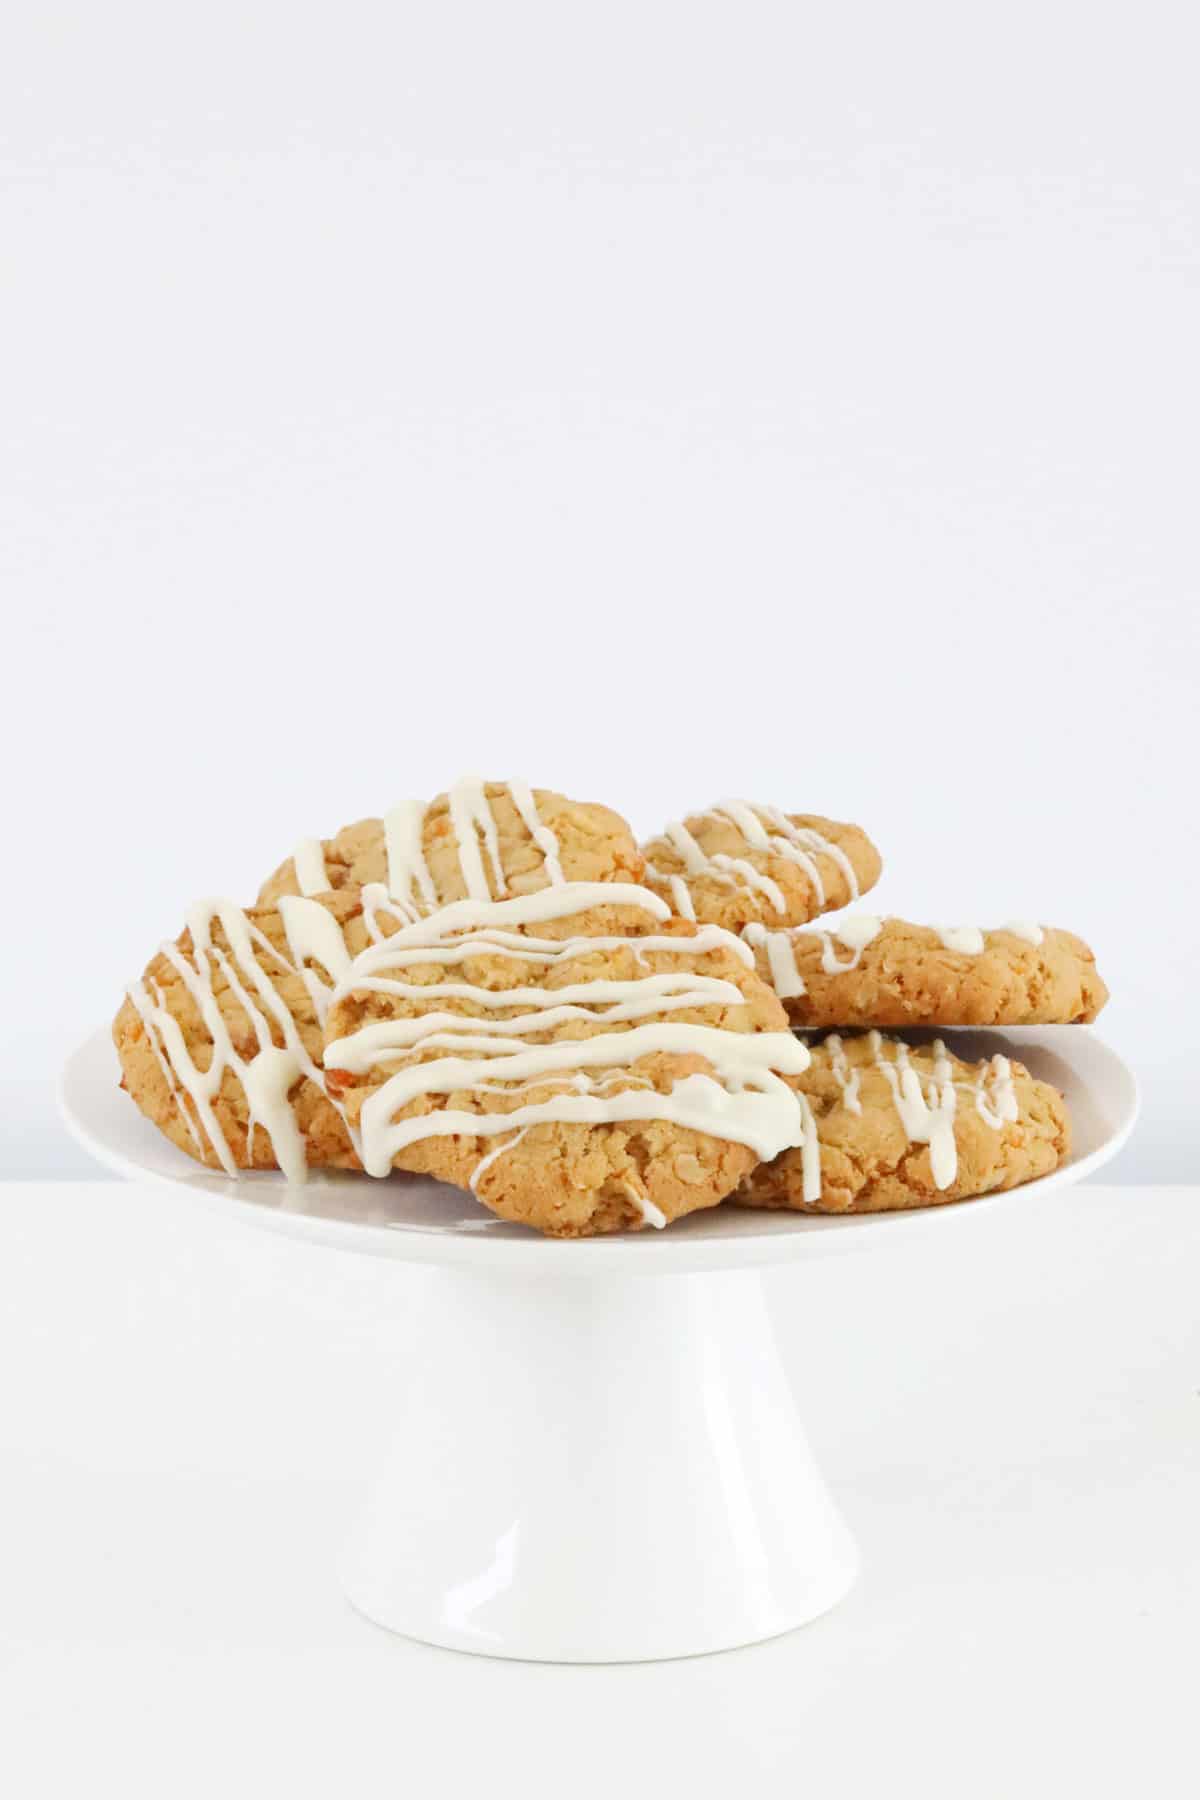 White chocolate drizzled over cookies on a white cake stand.